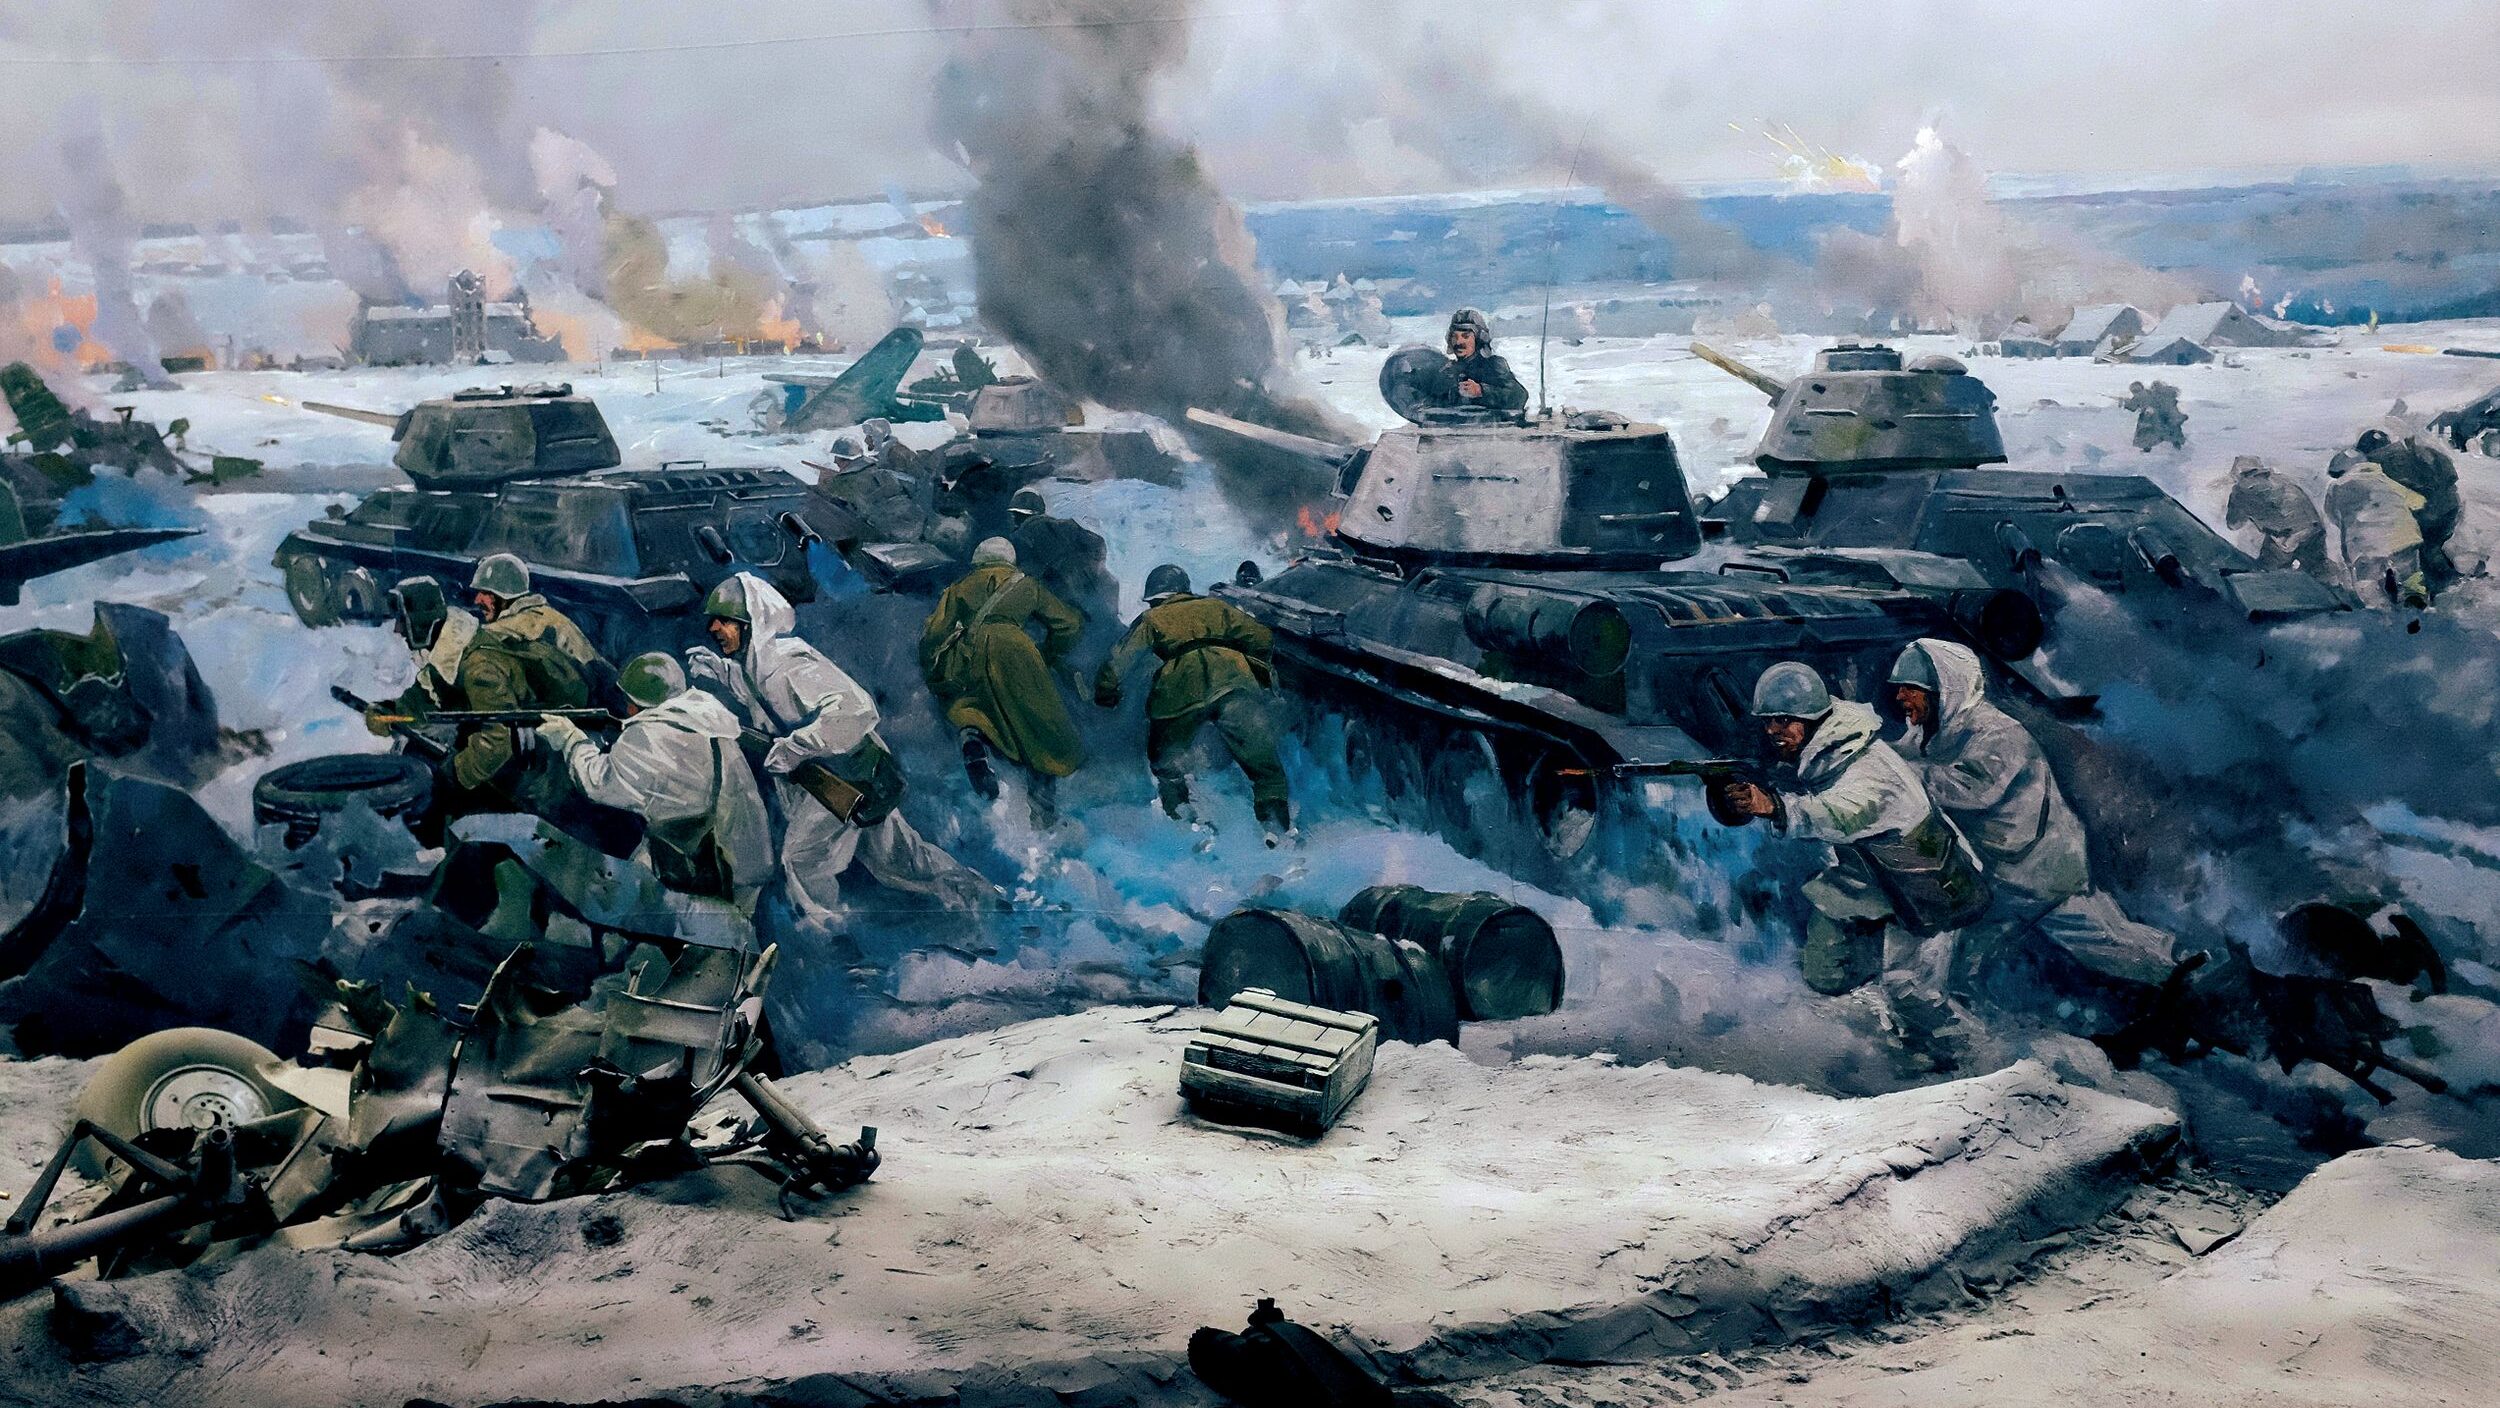 A panoramic painting of the Battle of Stalingrad depicts Soviet soldiers and T-34 tanks advancing against the invading Germans. The five-month siege ended in February, 1943, with a German defeat and two million deaths. Mariya Oktyabrskaya would see her first combat that October in Smolensk.